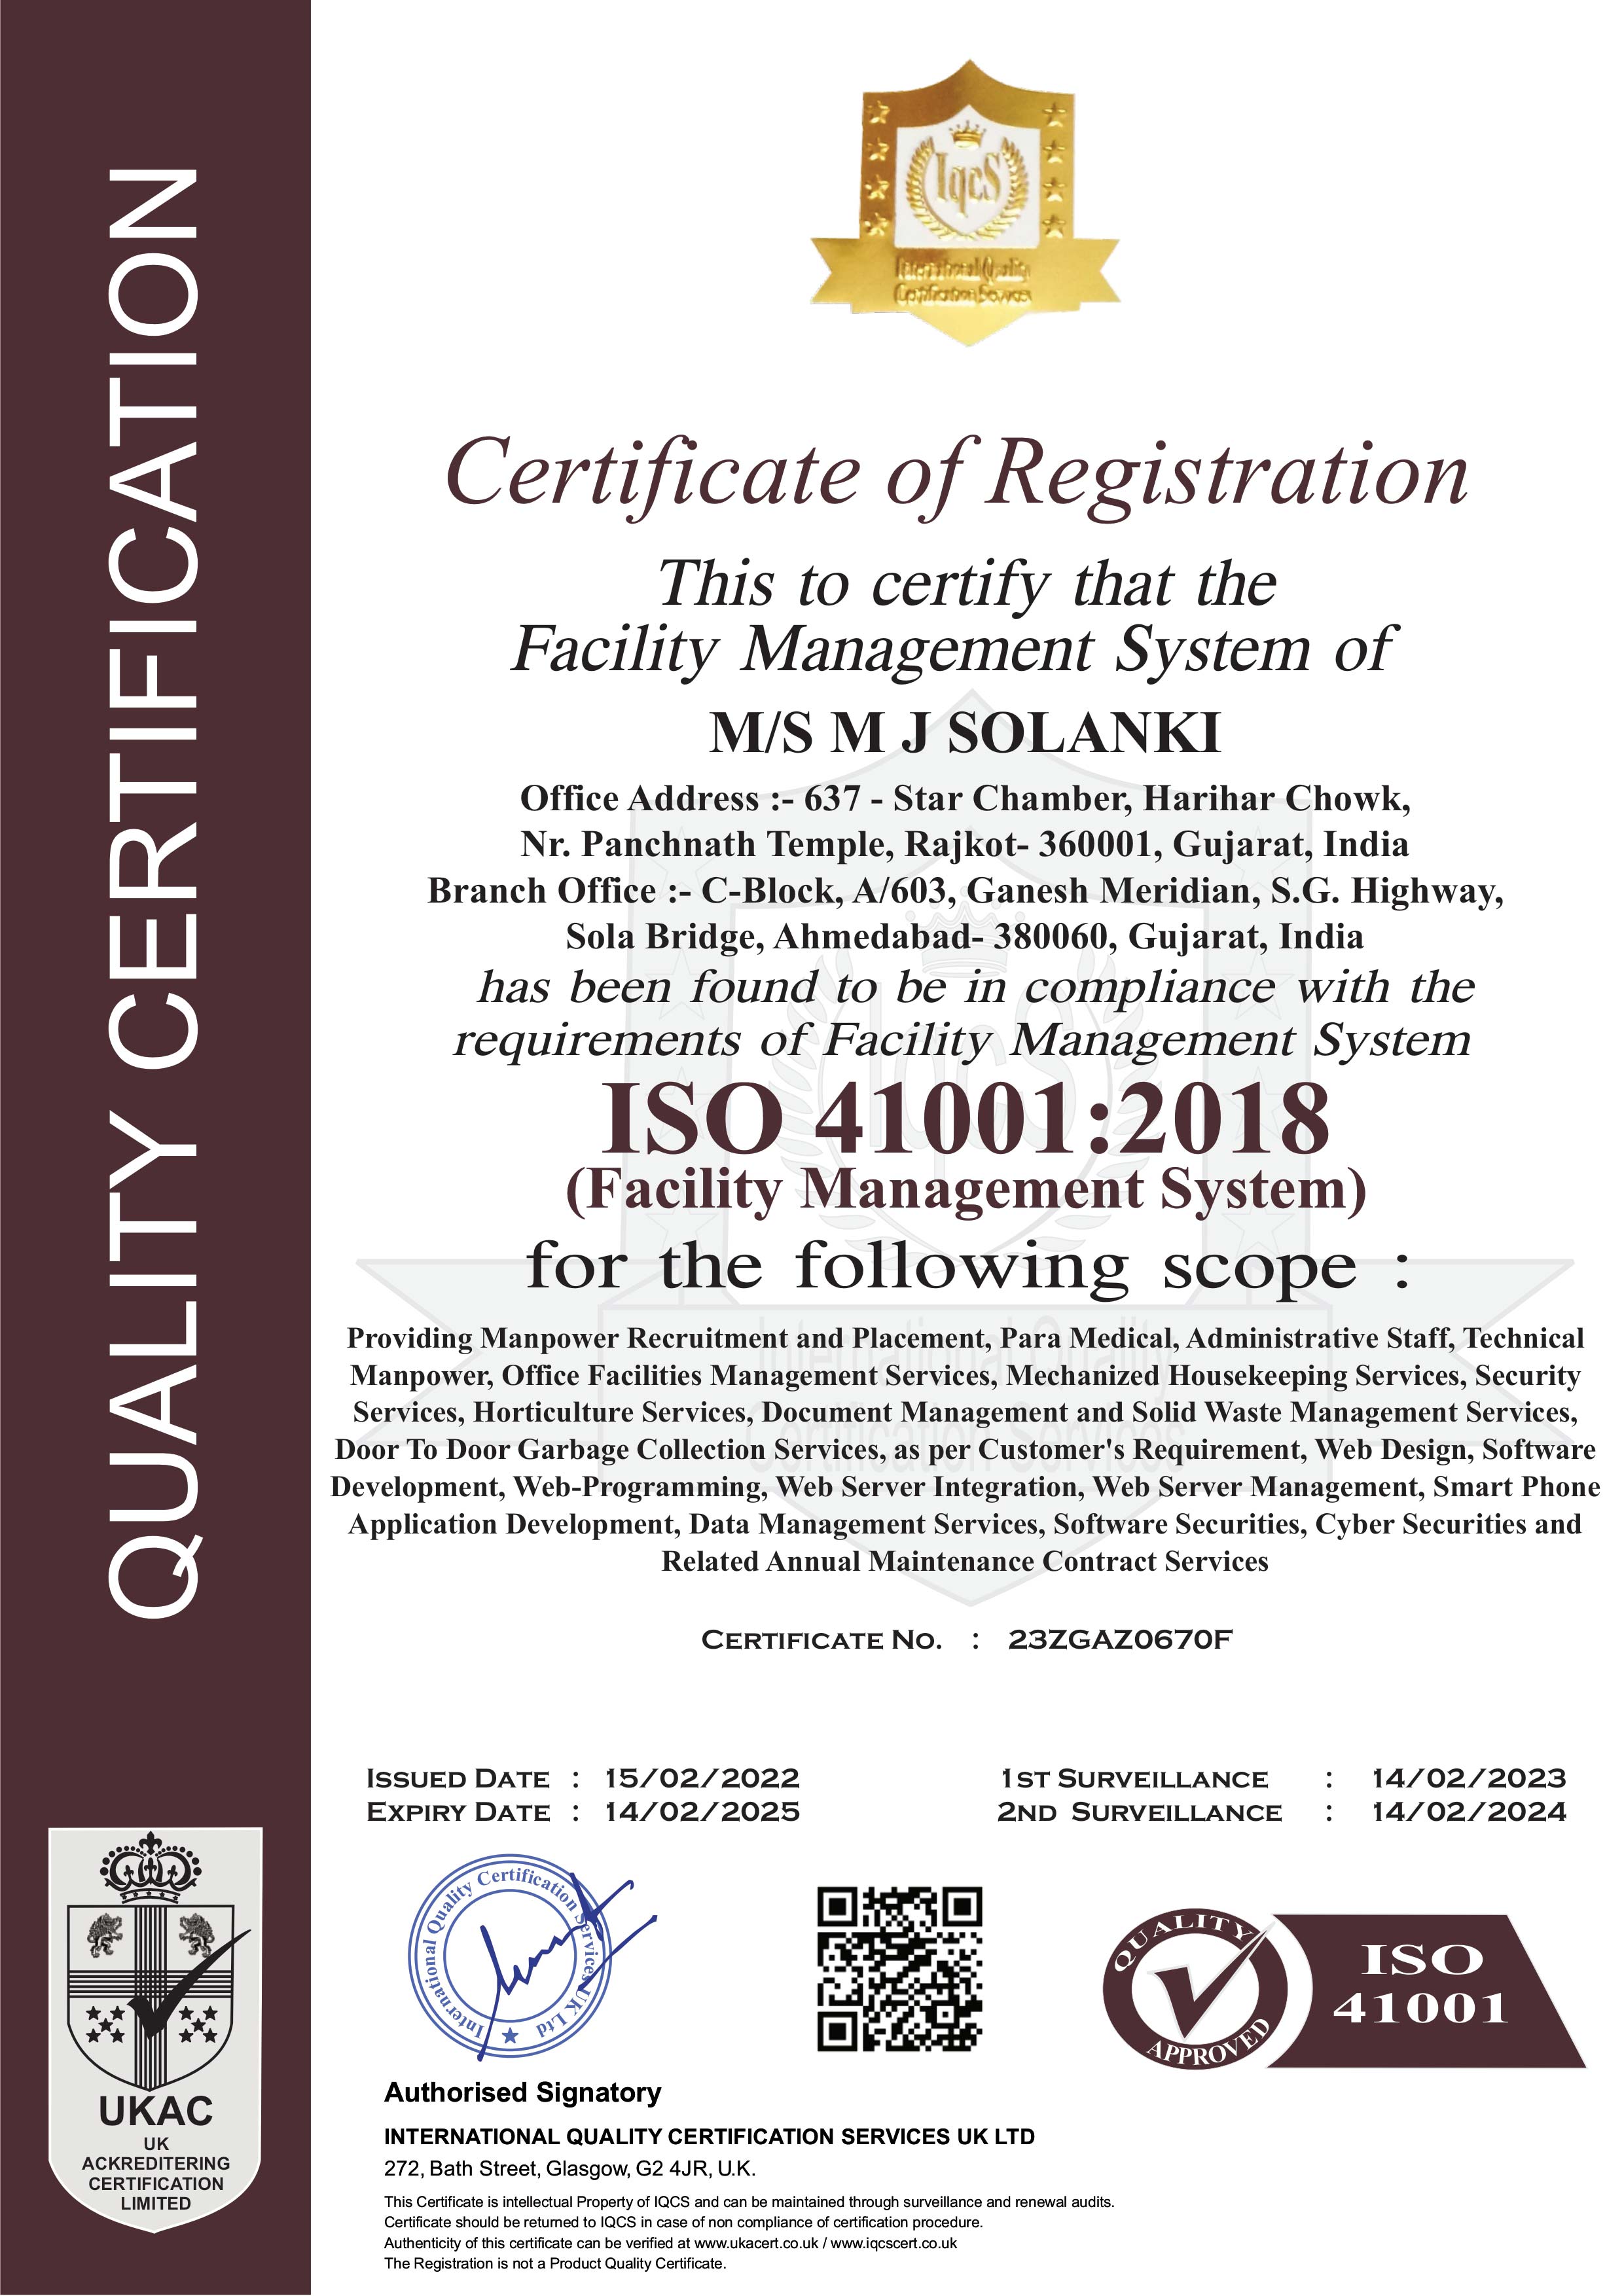 Facility Management System Certificate Image